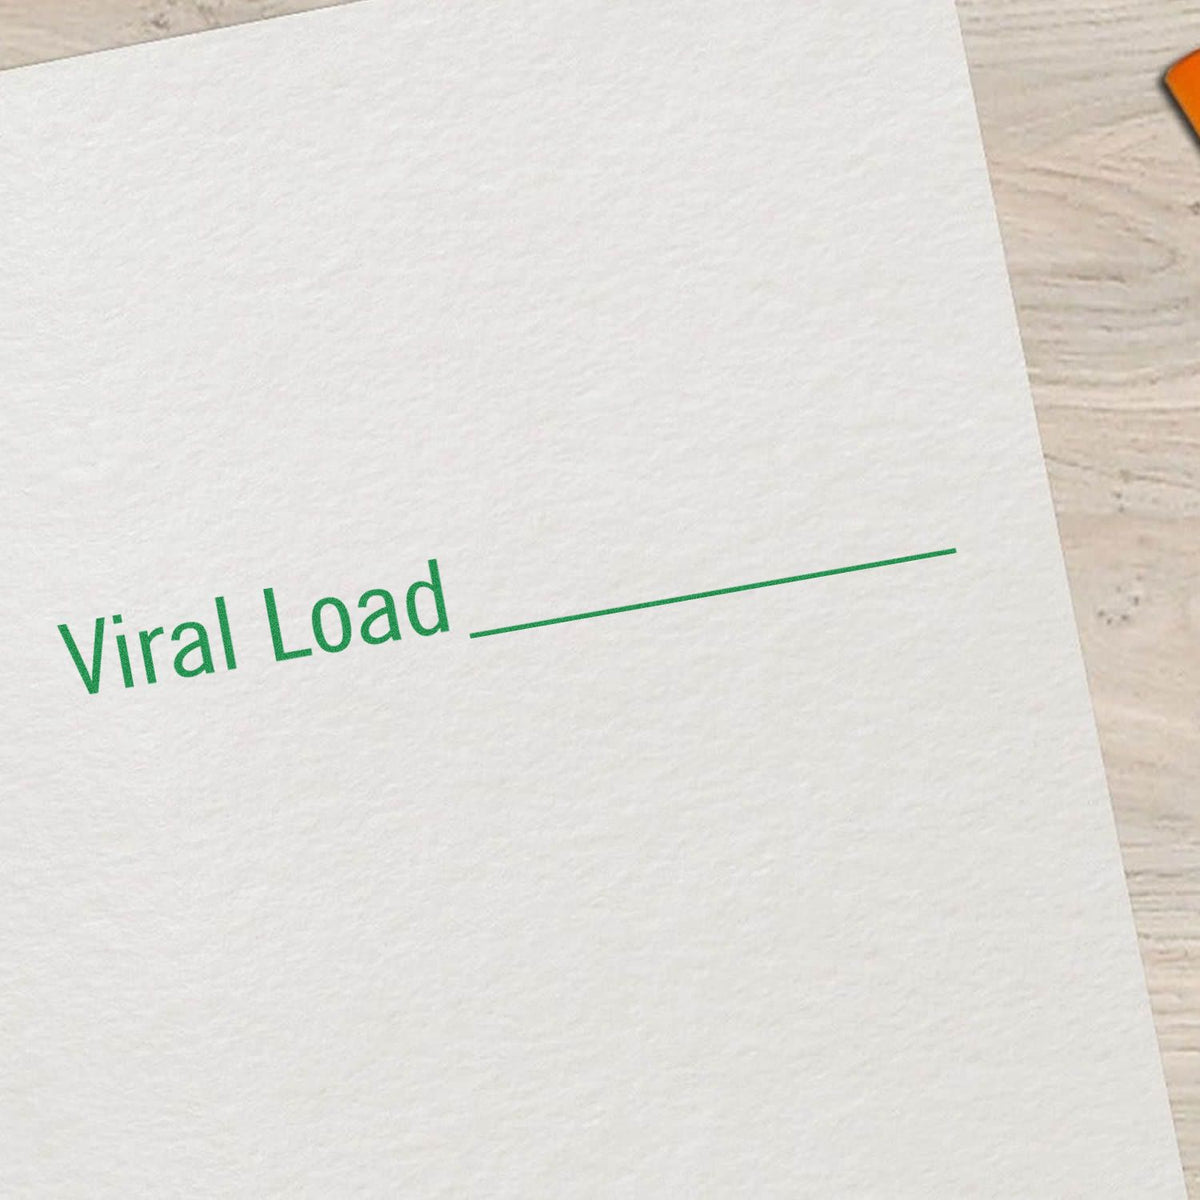 Viral Load Rubber Stamp In Use